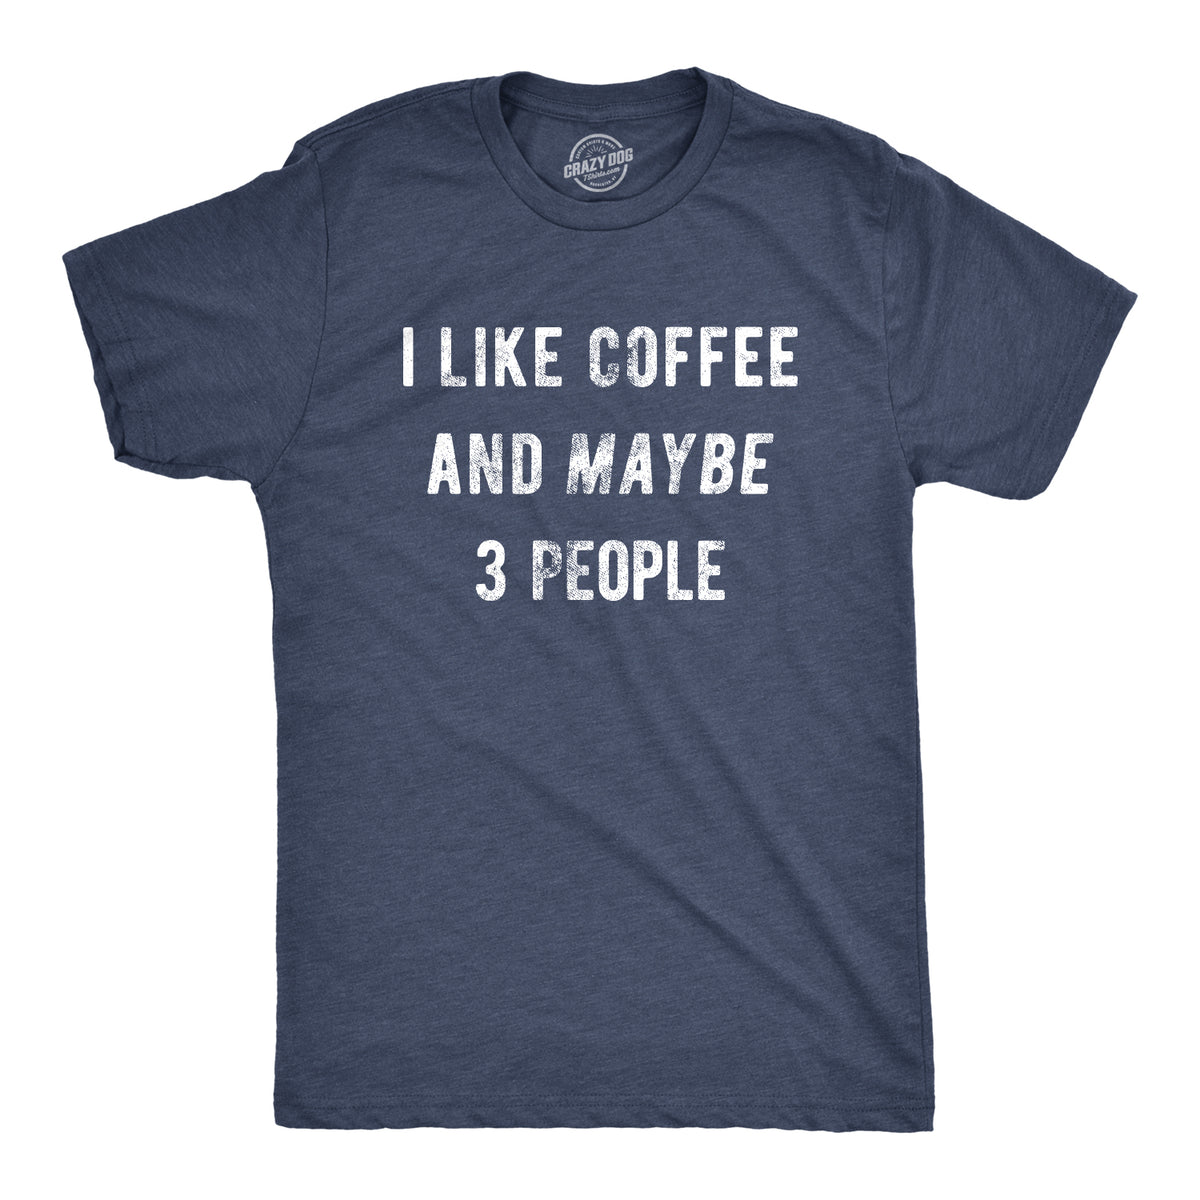 Funny Heather Navy I Like Coffee And Maybe 3 People Mens T Shirt Nerdy Coffee Tee